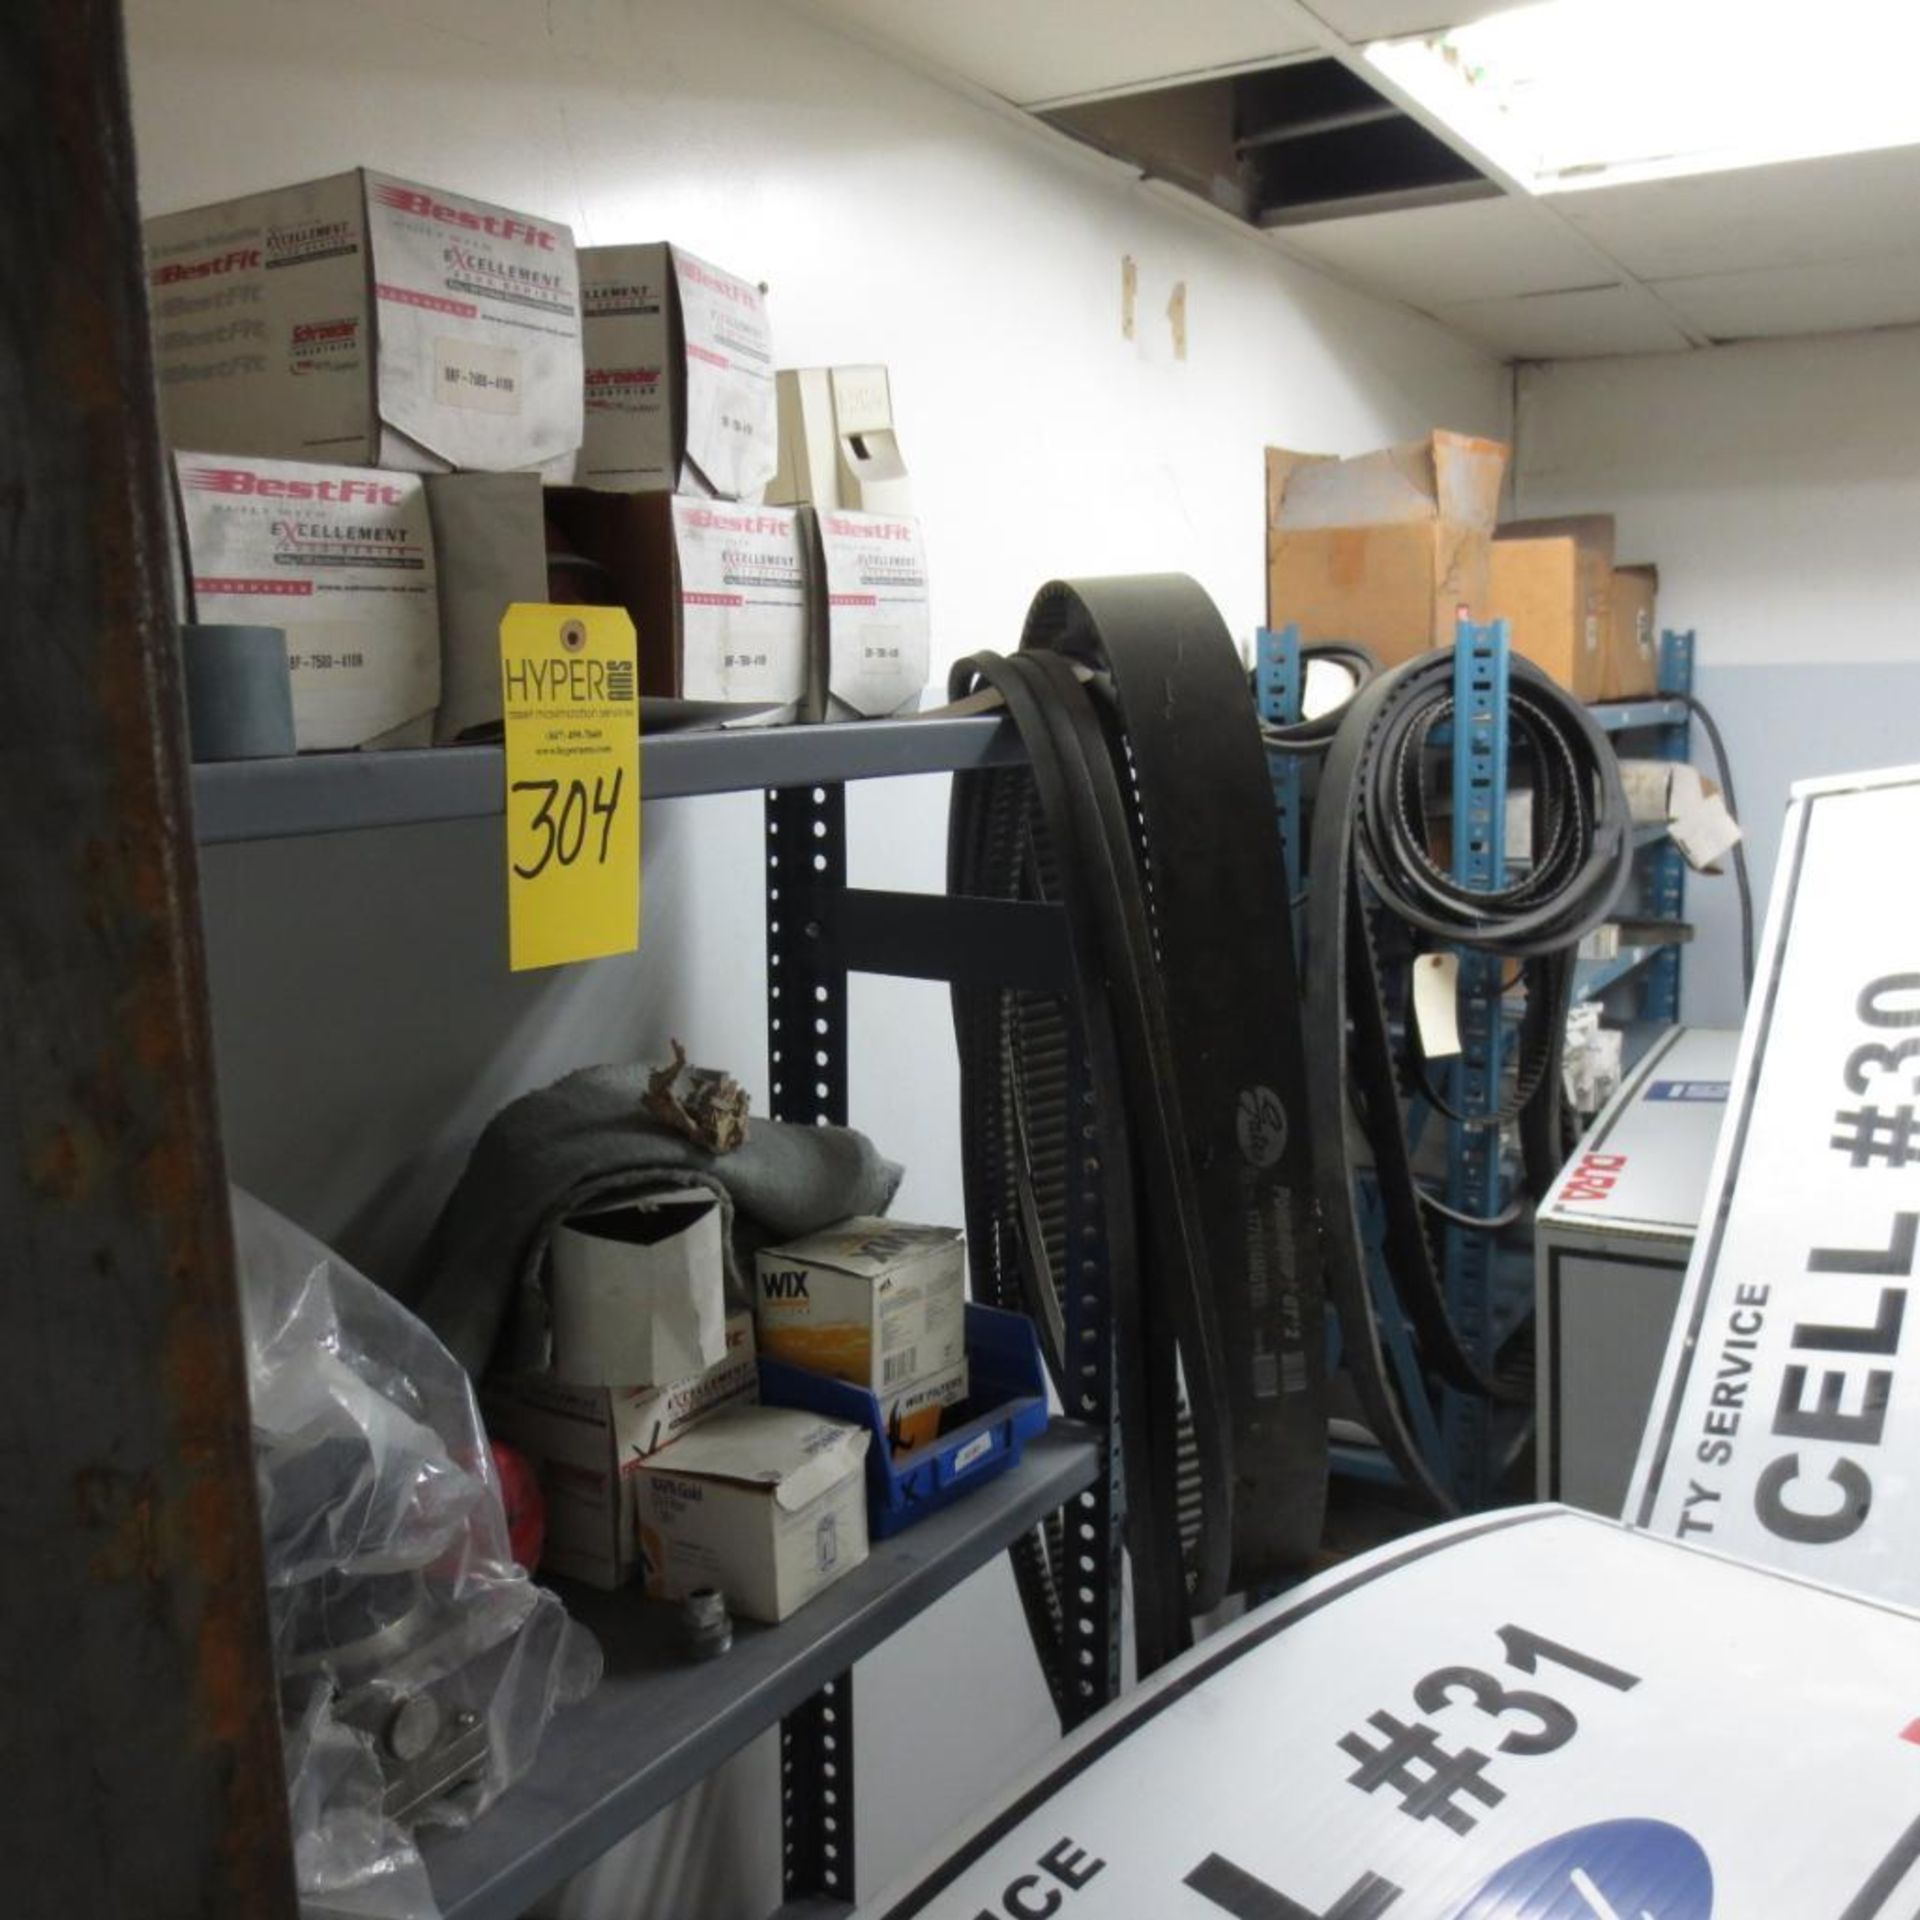 Parts Room Consisting of Gears, Electric Boards, Motors, AB Item, Filters, Motor Starters and Parts - Image 4 of 42